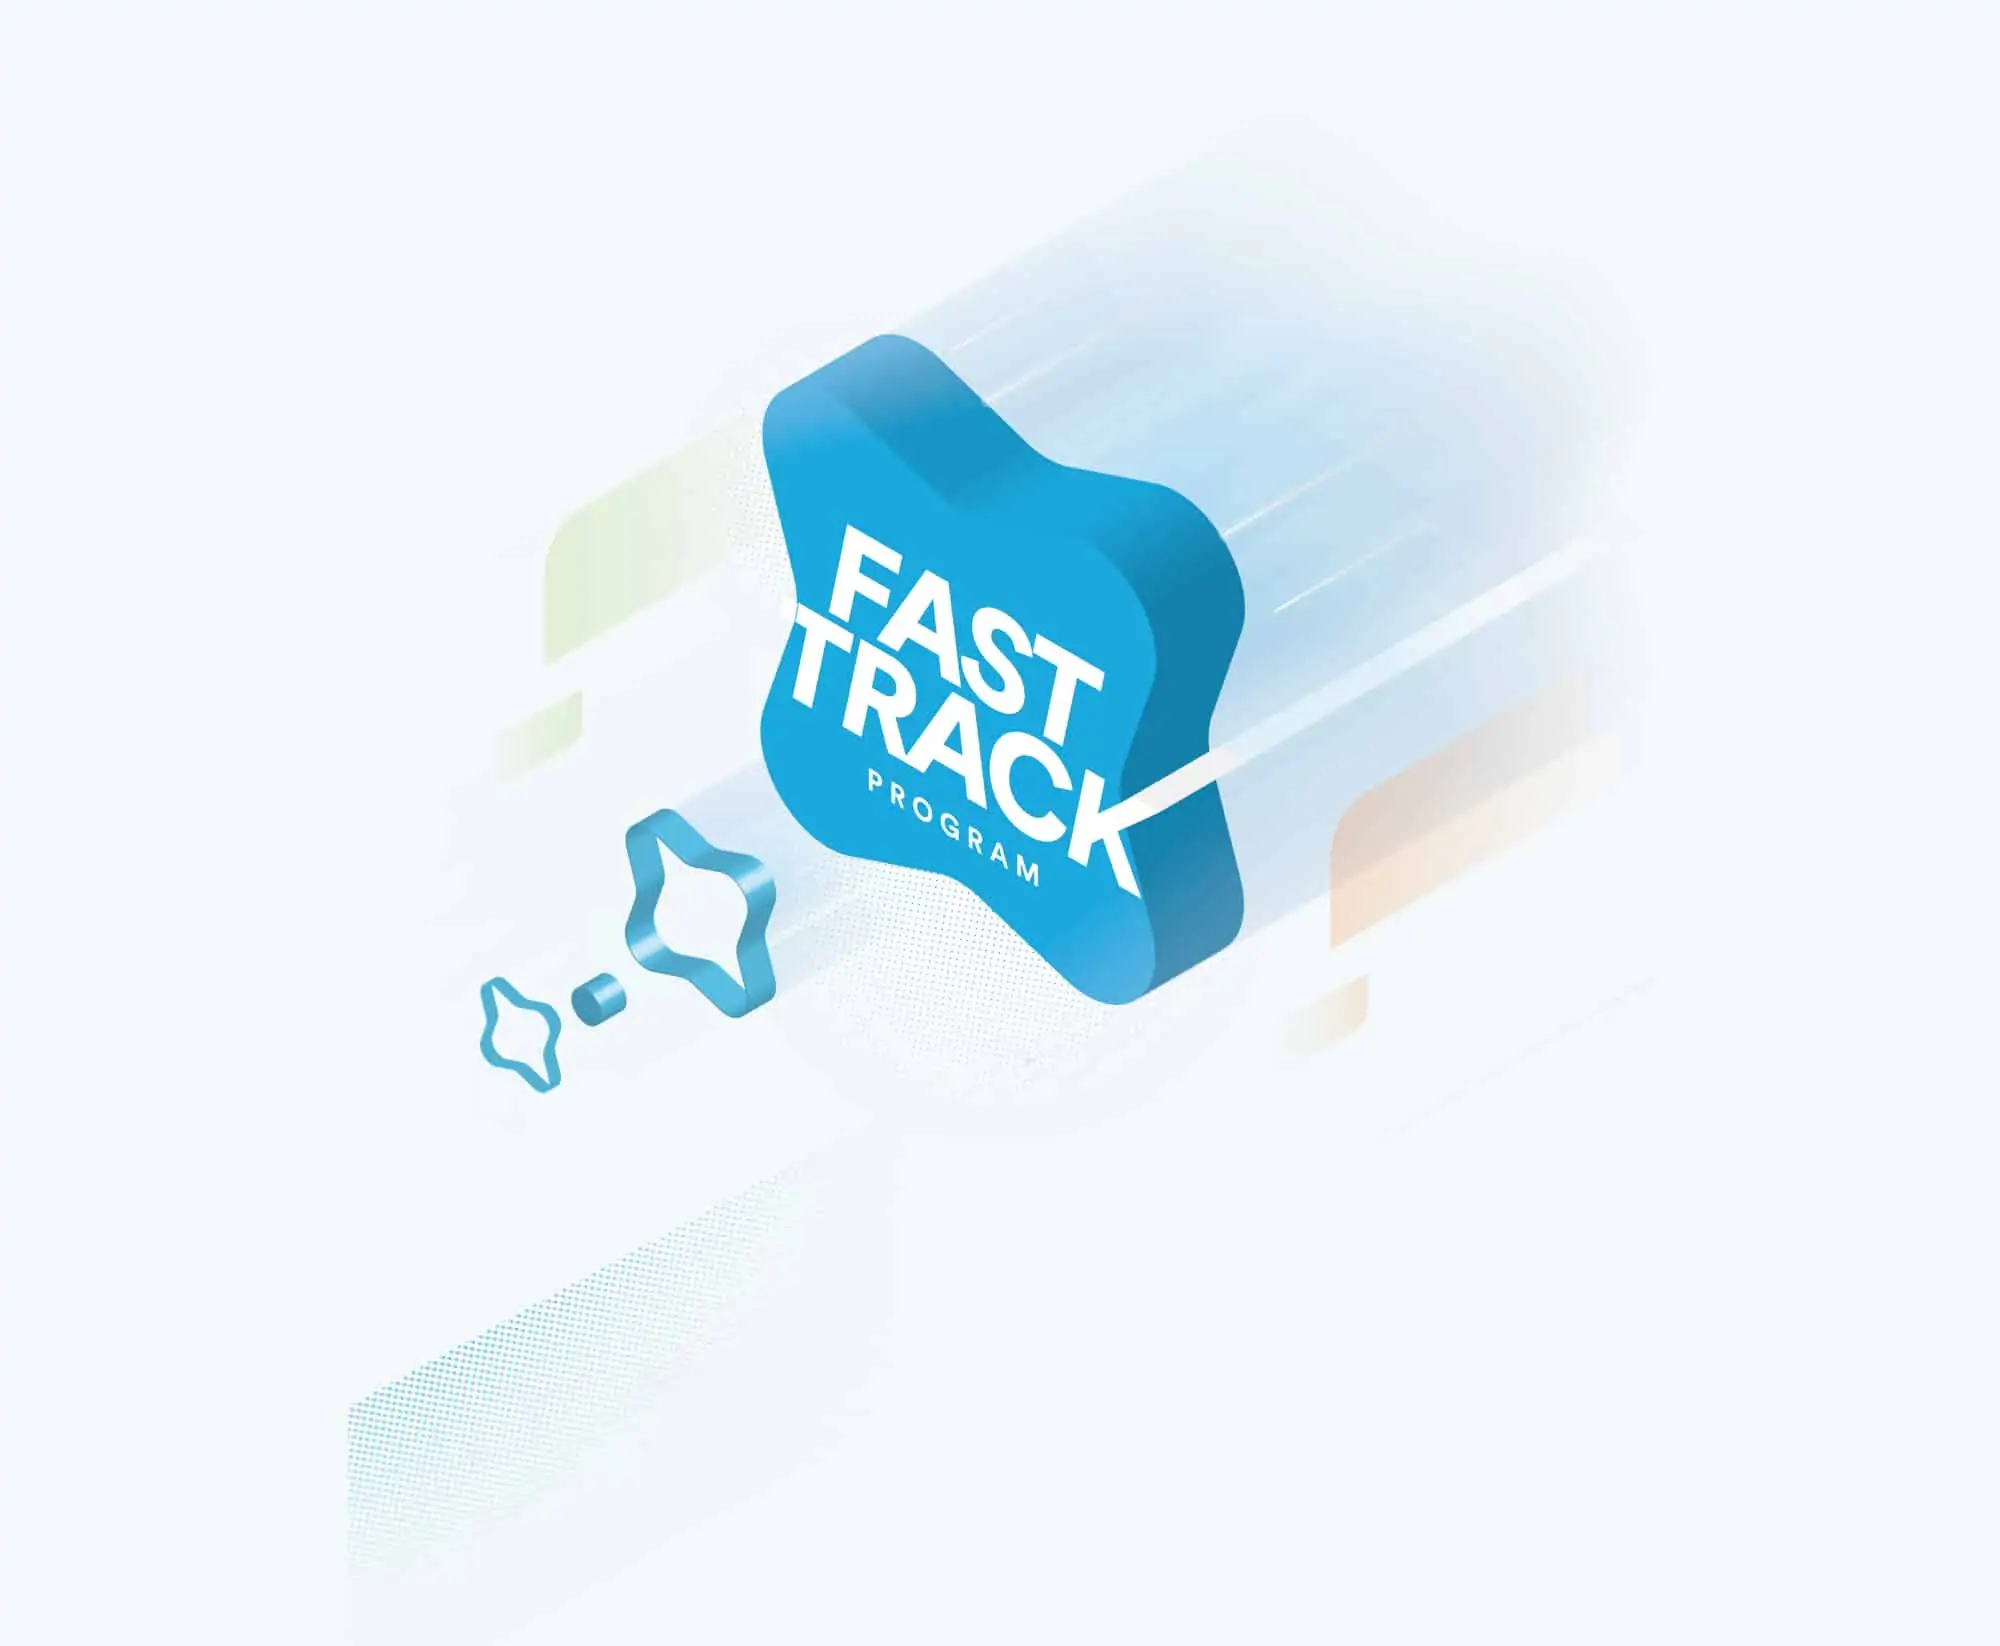 Learn About the Fast-Track Program